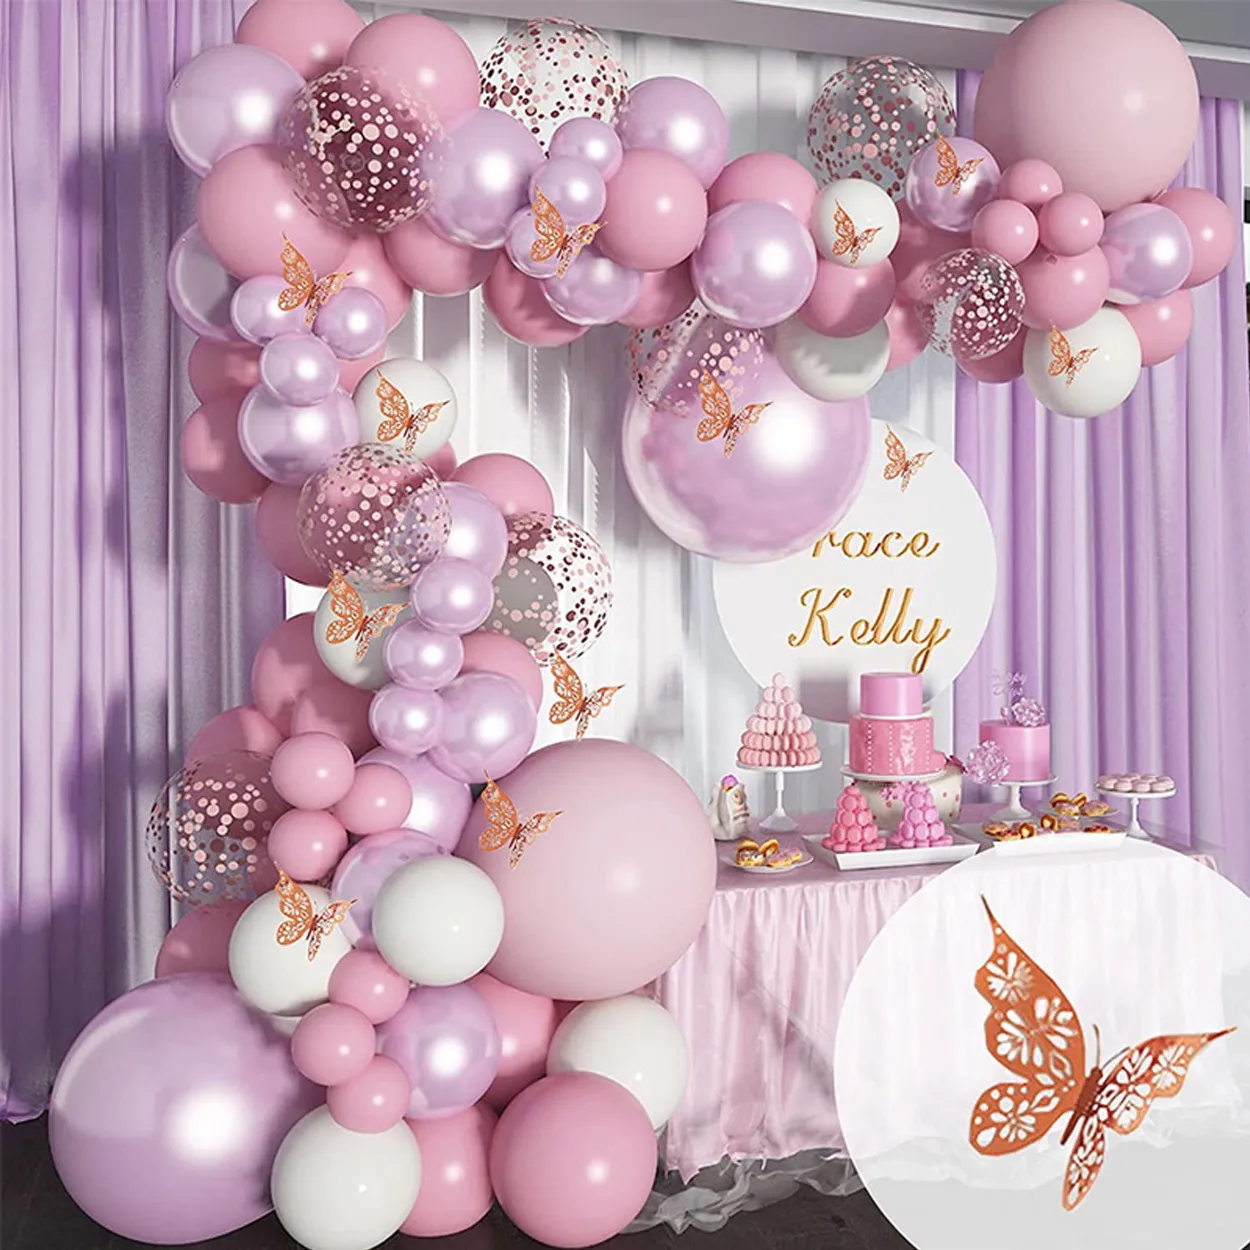 113pcs Butterfly Metal Pink Macaron Balloon Chain Package Birthday Party Decoration Background Wall